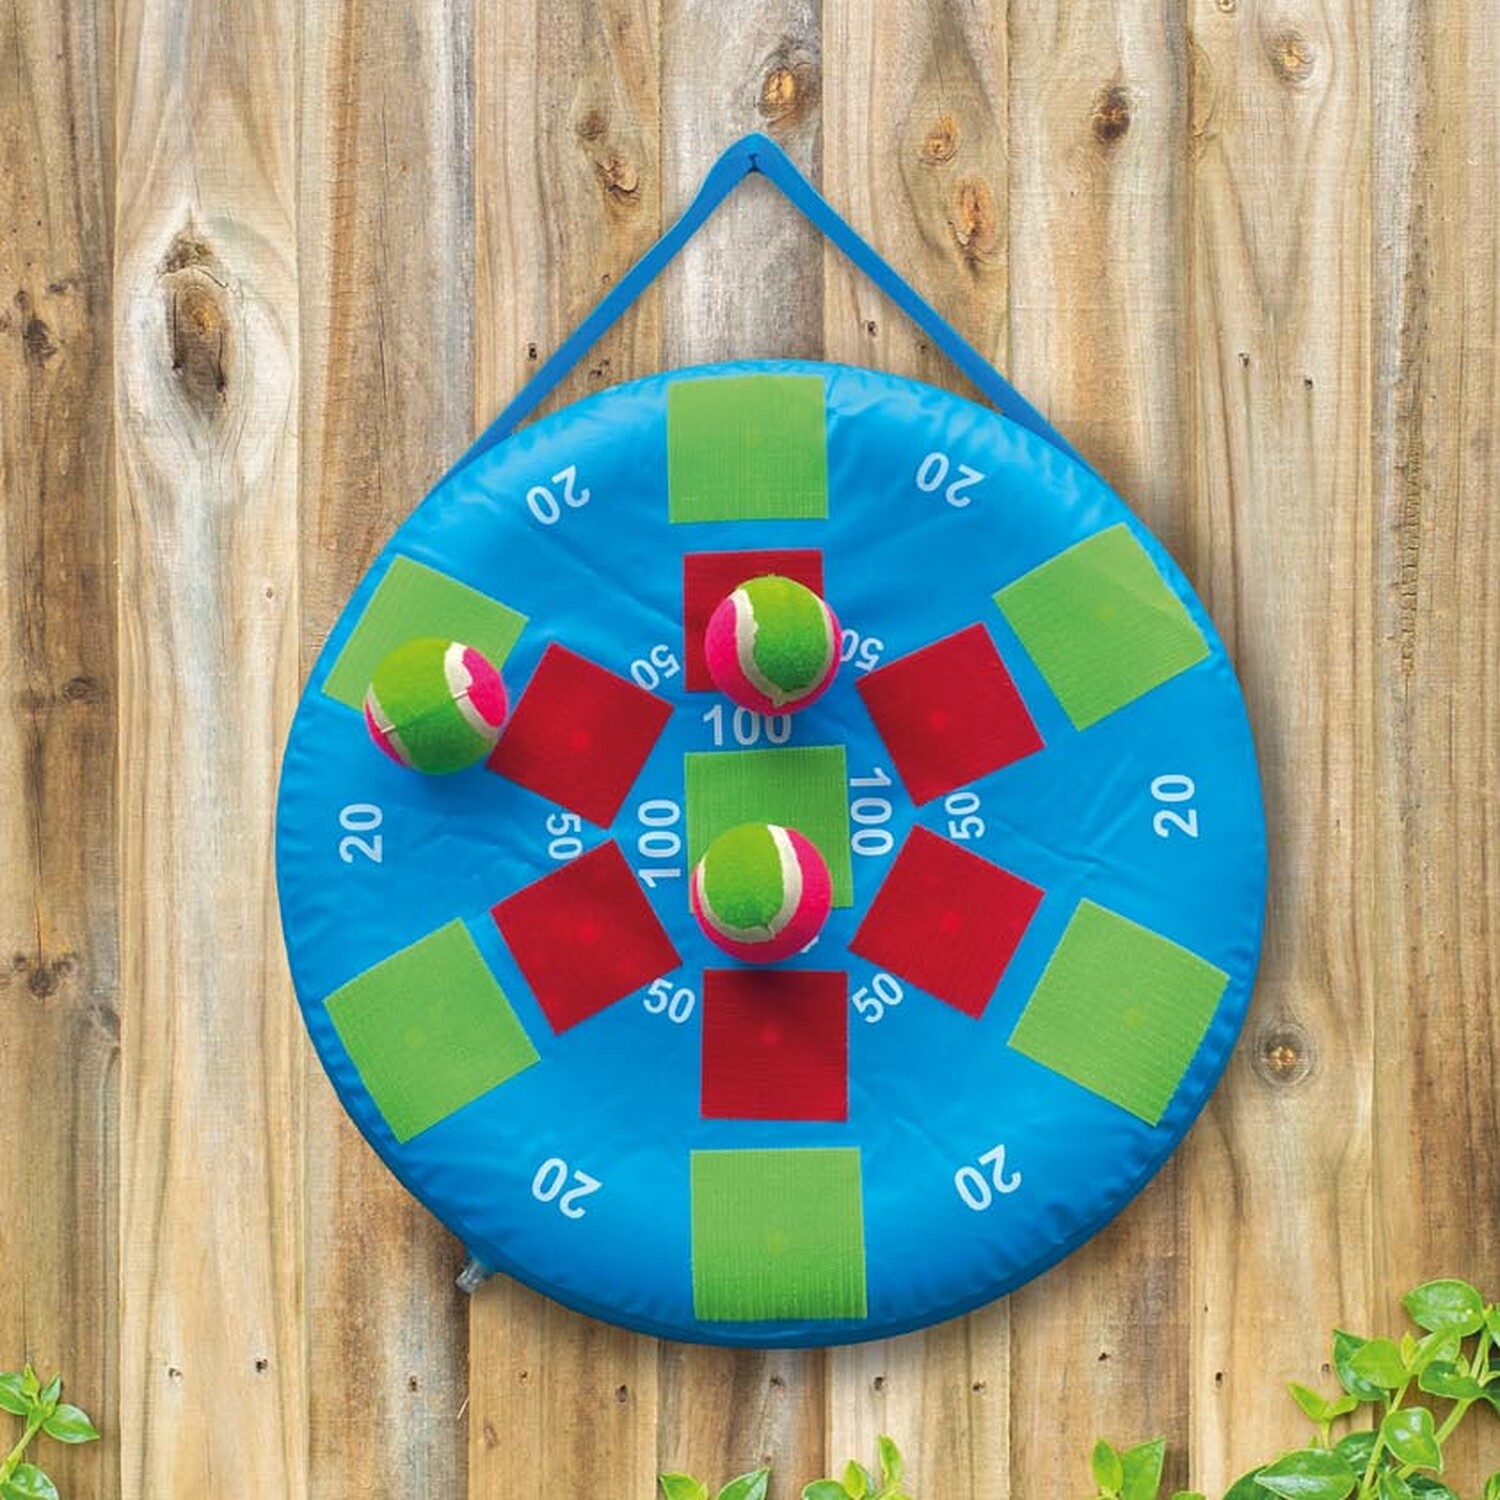 Inflatable Target Ball Game - Blue Image 2